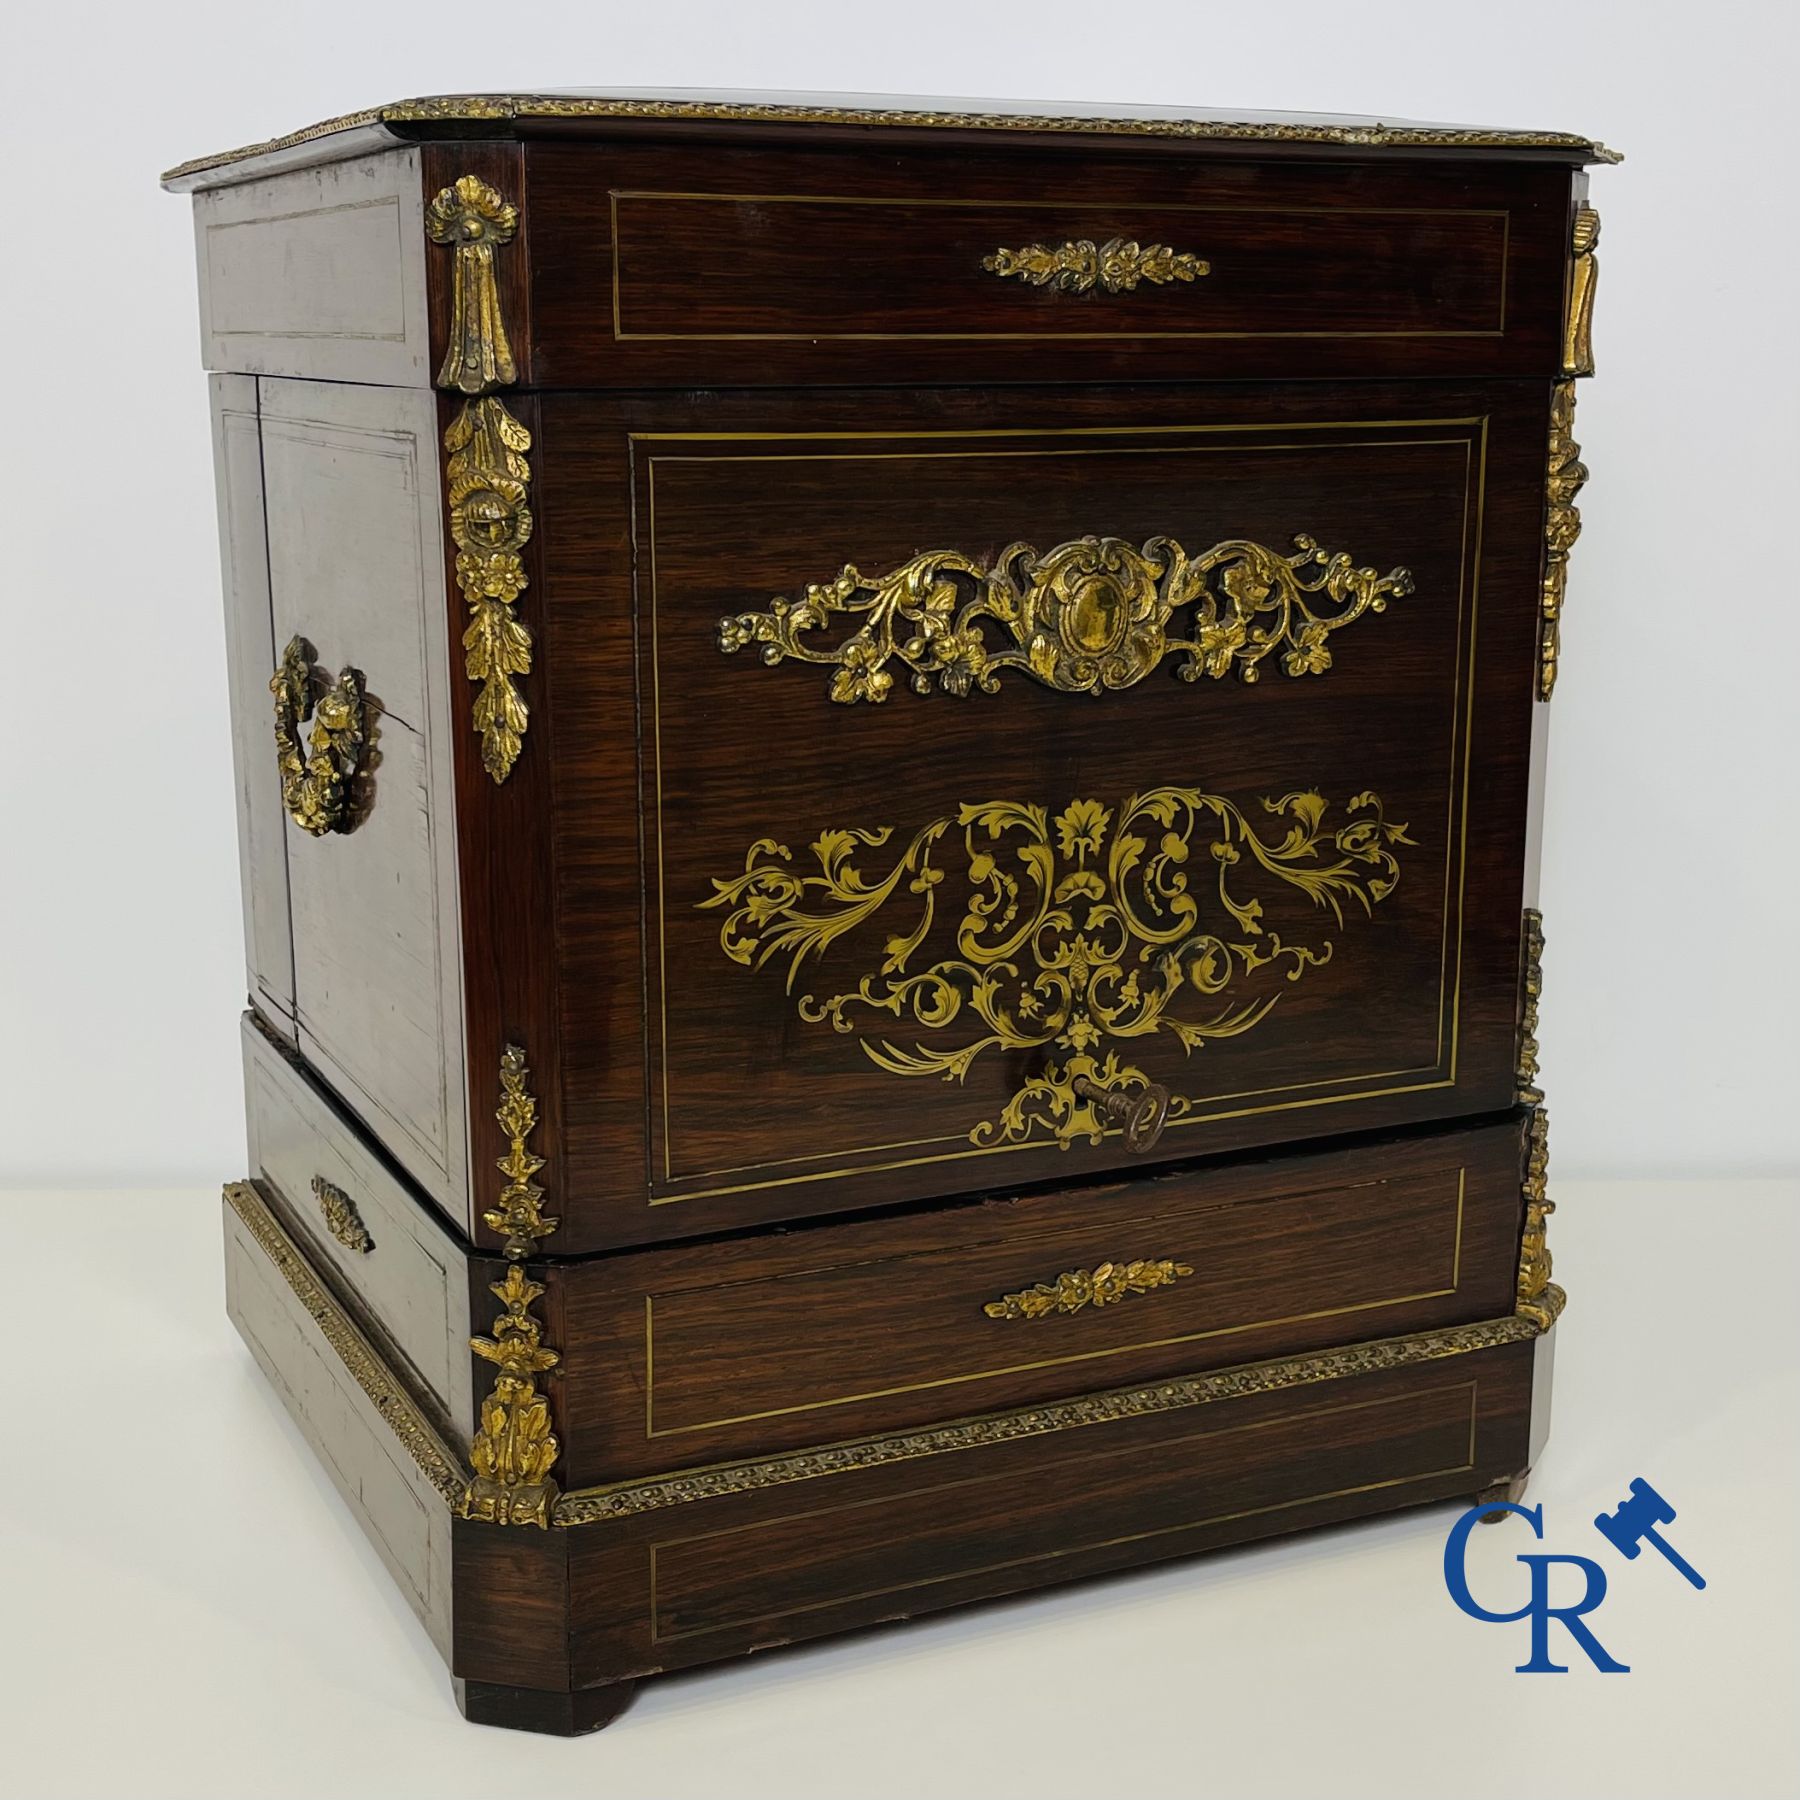 An imposing rosewood liqueur case with bronze fittings and inlays in Boulle style. 19th century. - Image 2 of 13